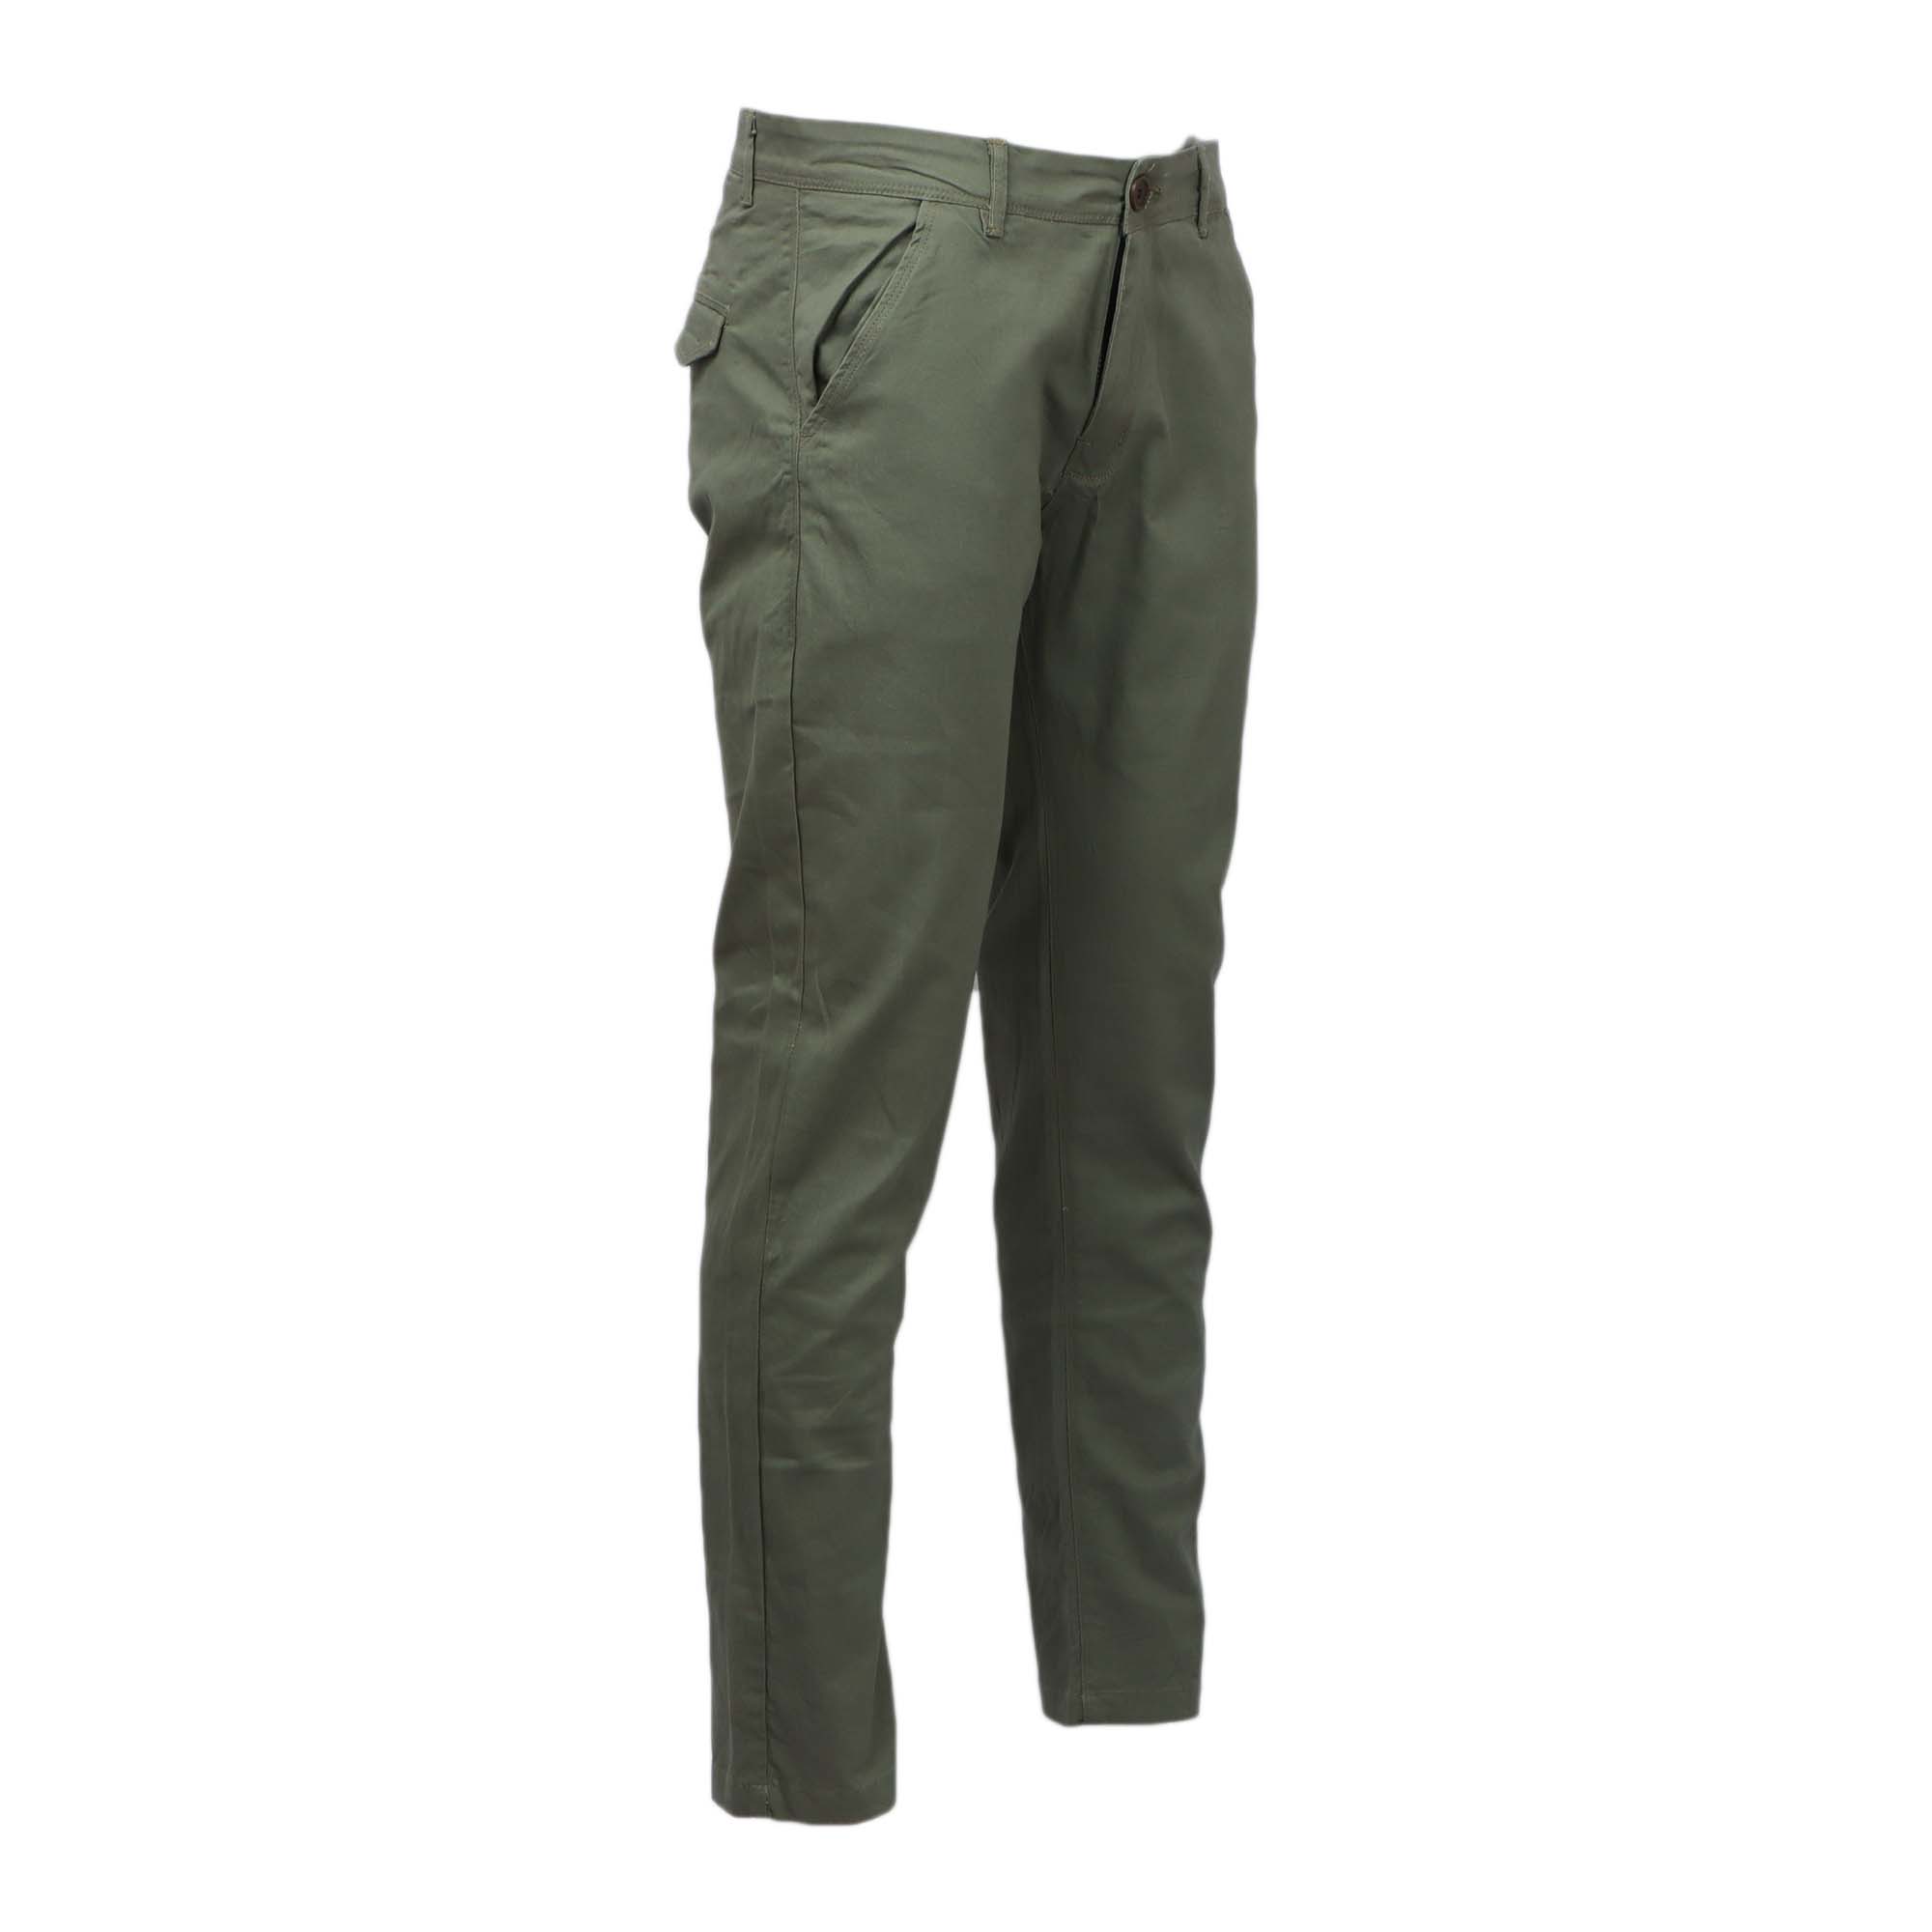 Men's Stylish Cotton Stretchable Pants in Nepal - Buy Trousers at